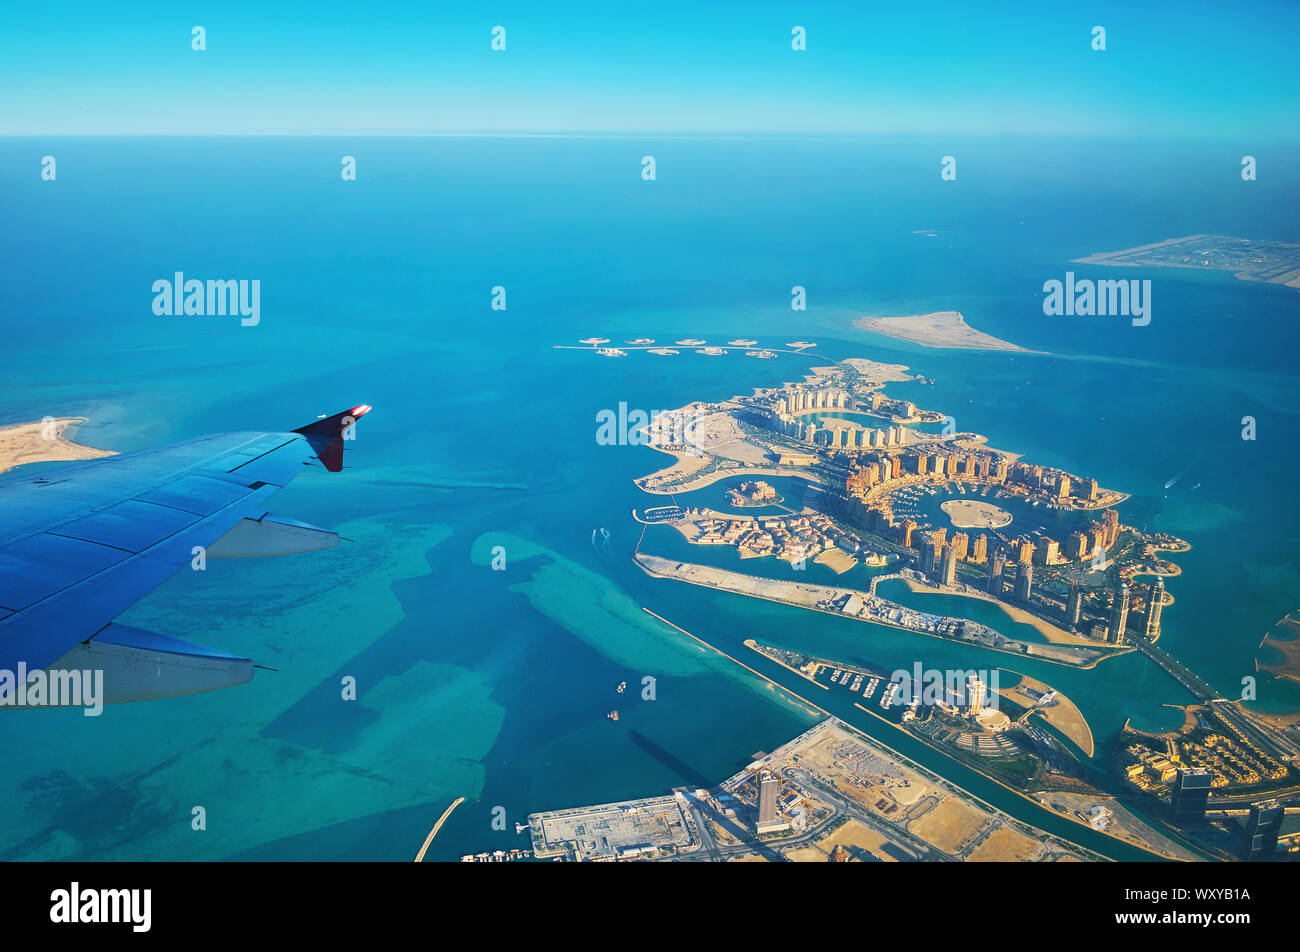 Aerial view on turquoise waters of Persian Gulf and Pearl-Qatar artificial island with luxury hotels, harbors, malls, Isola Dana islets, Porto Arabia Stock Photo